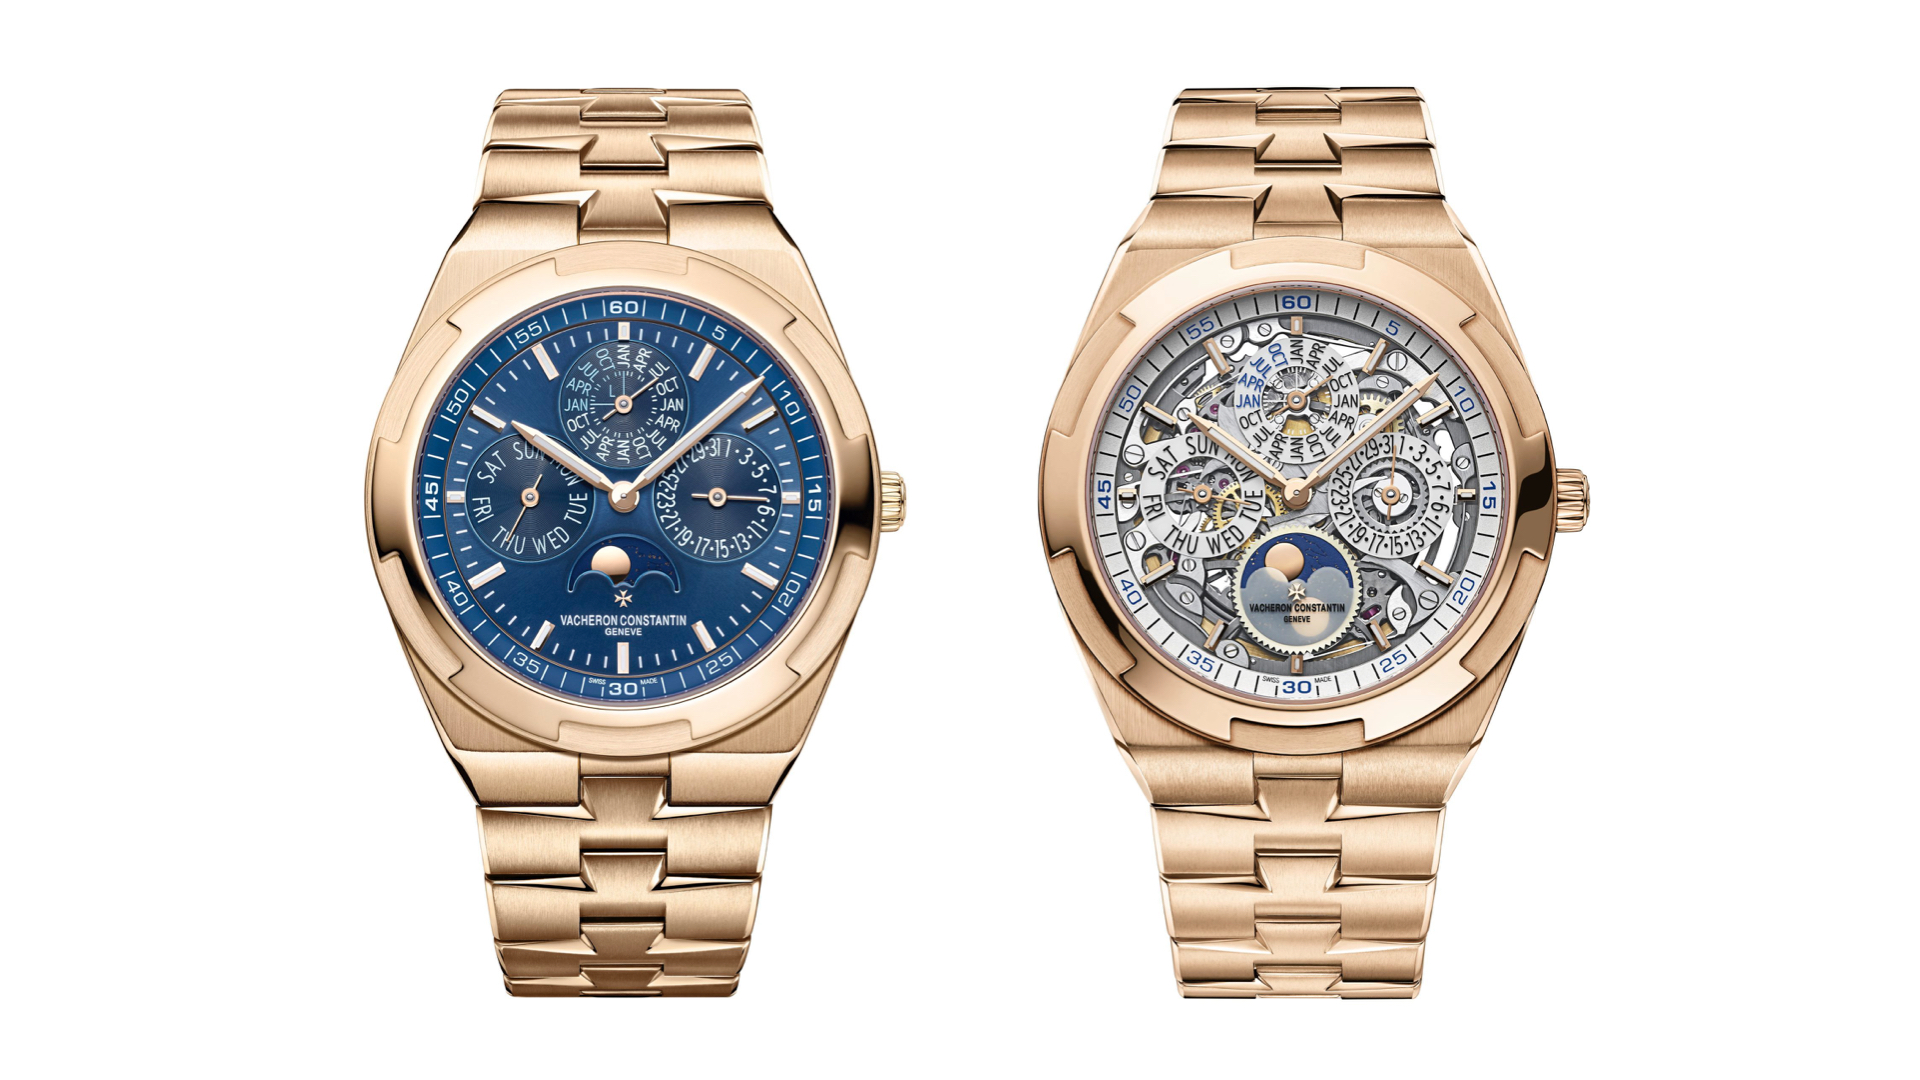 INTRODUCING: If you’re complicated and sporty, do we have two new 2020 Vacheron Constantin Overseas watches for you